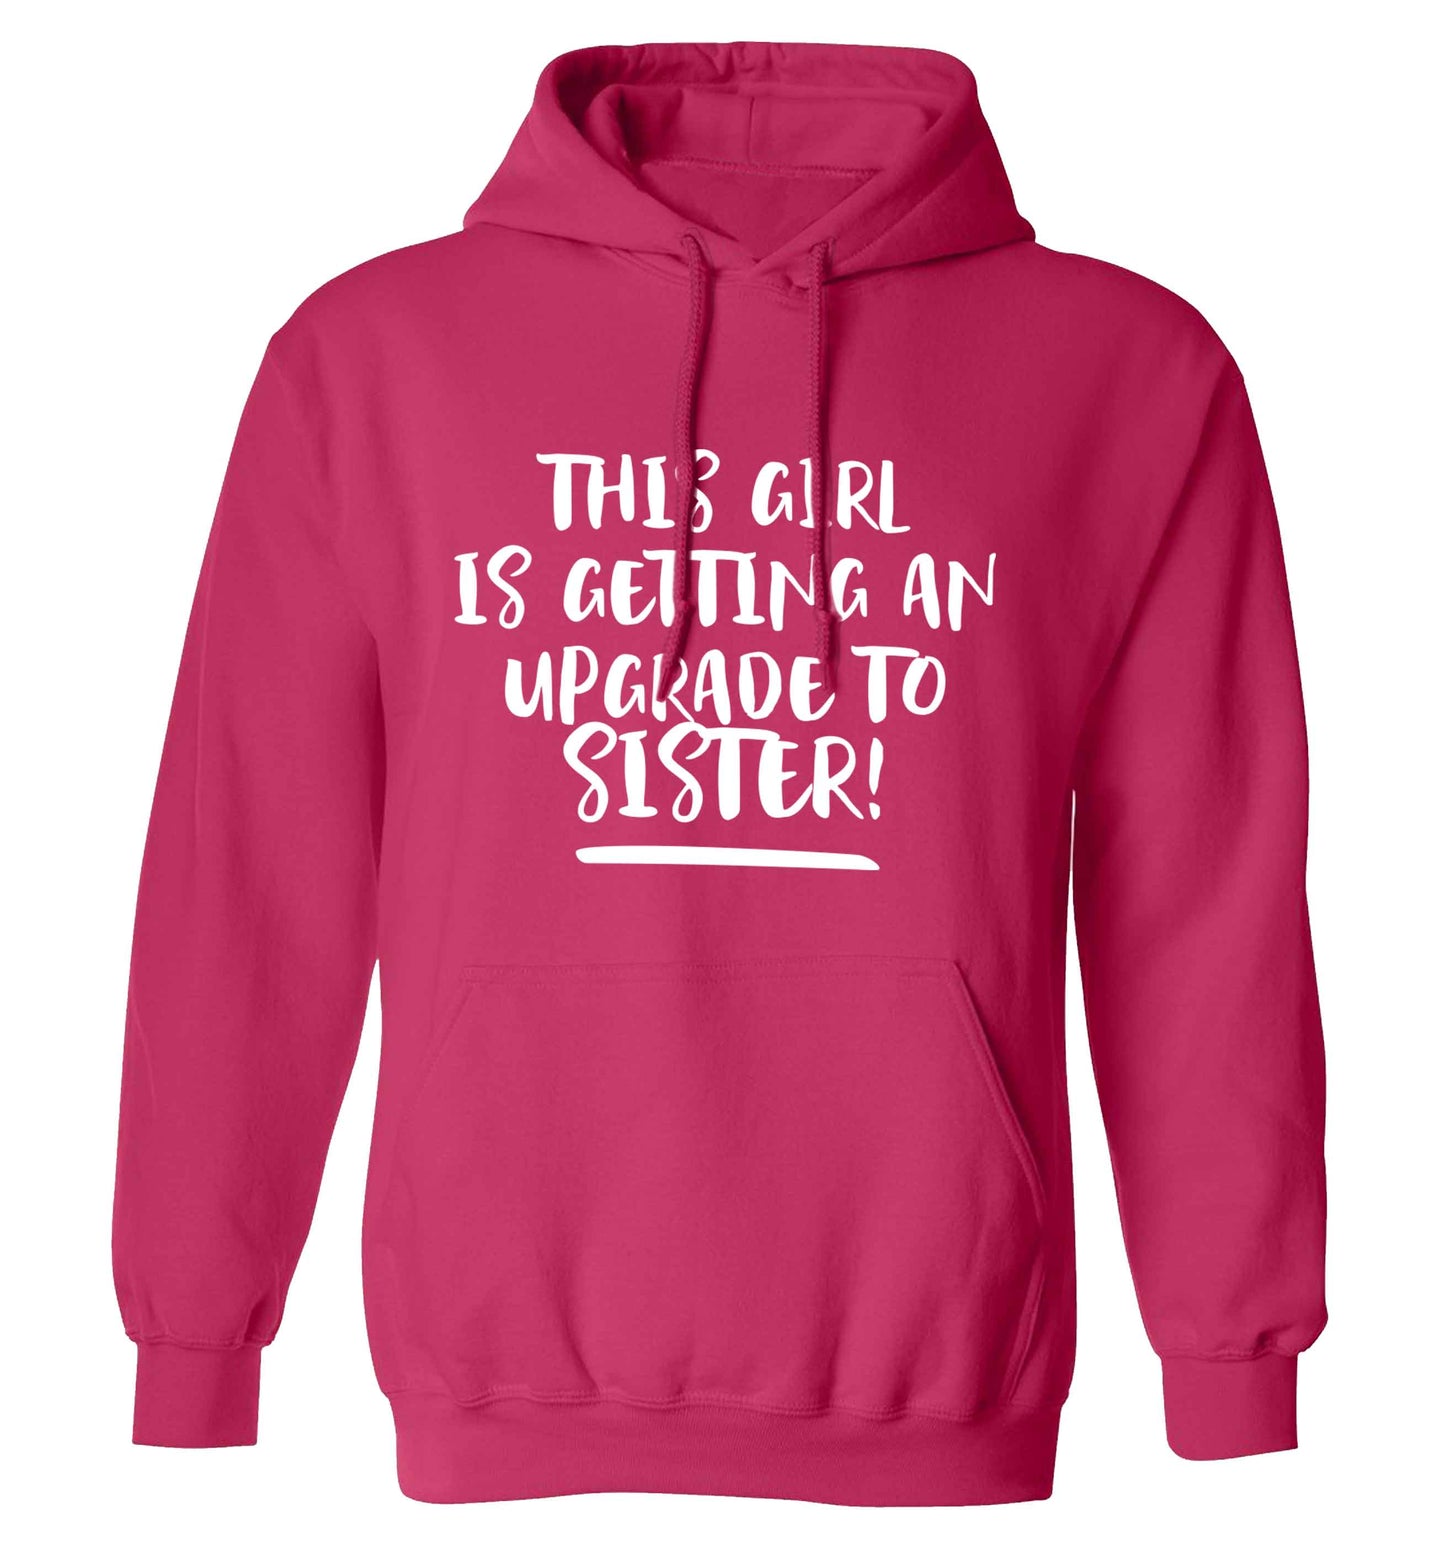 This girl is getting an upgrade to sister! adults unisex pink hoodie 2XL